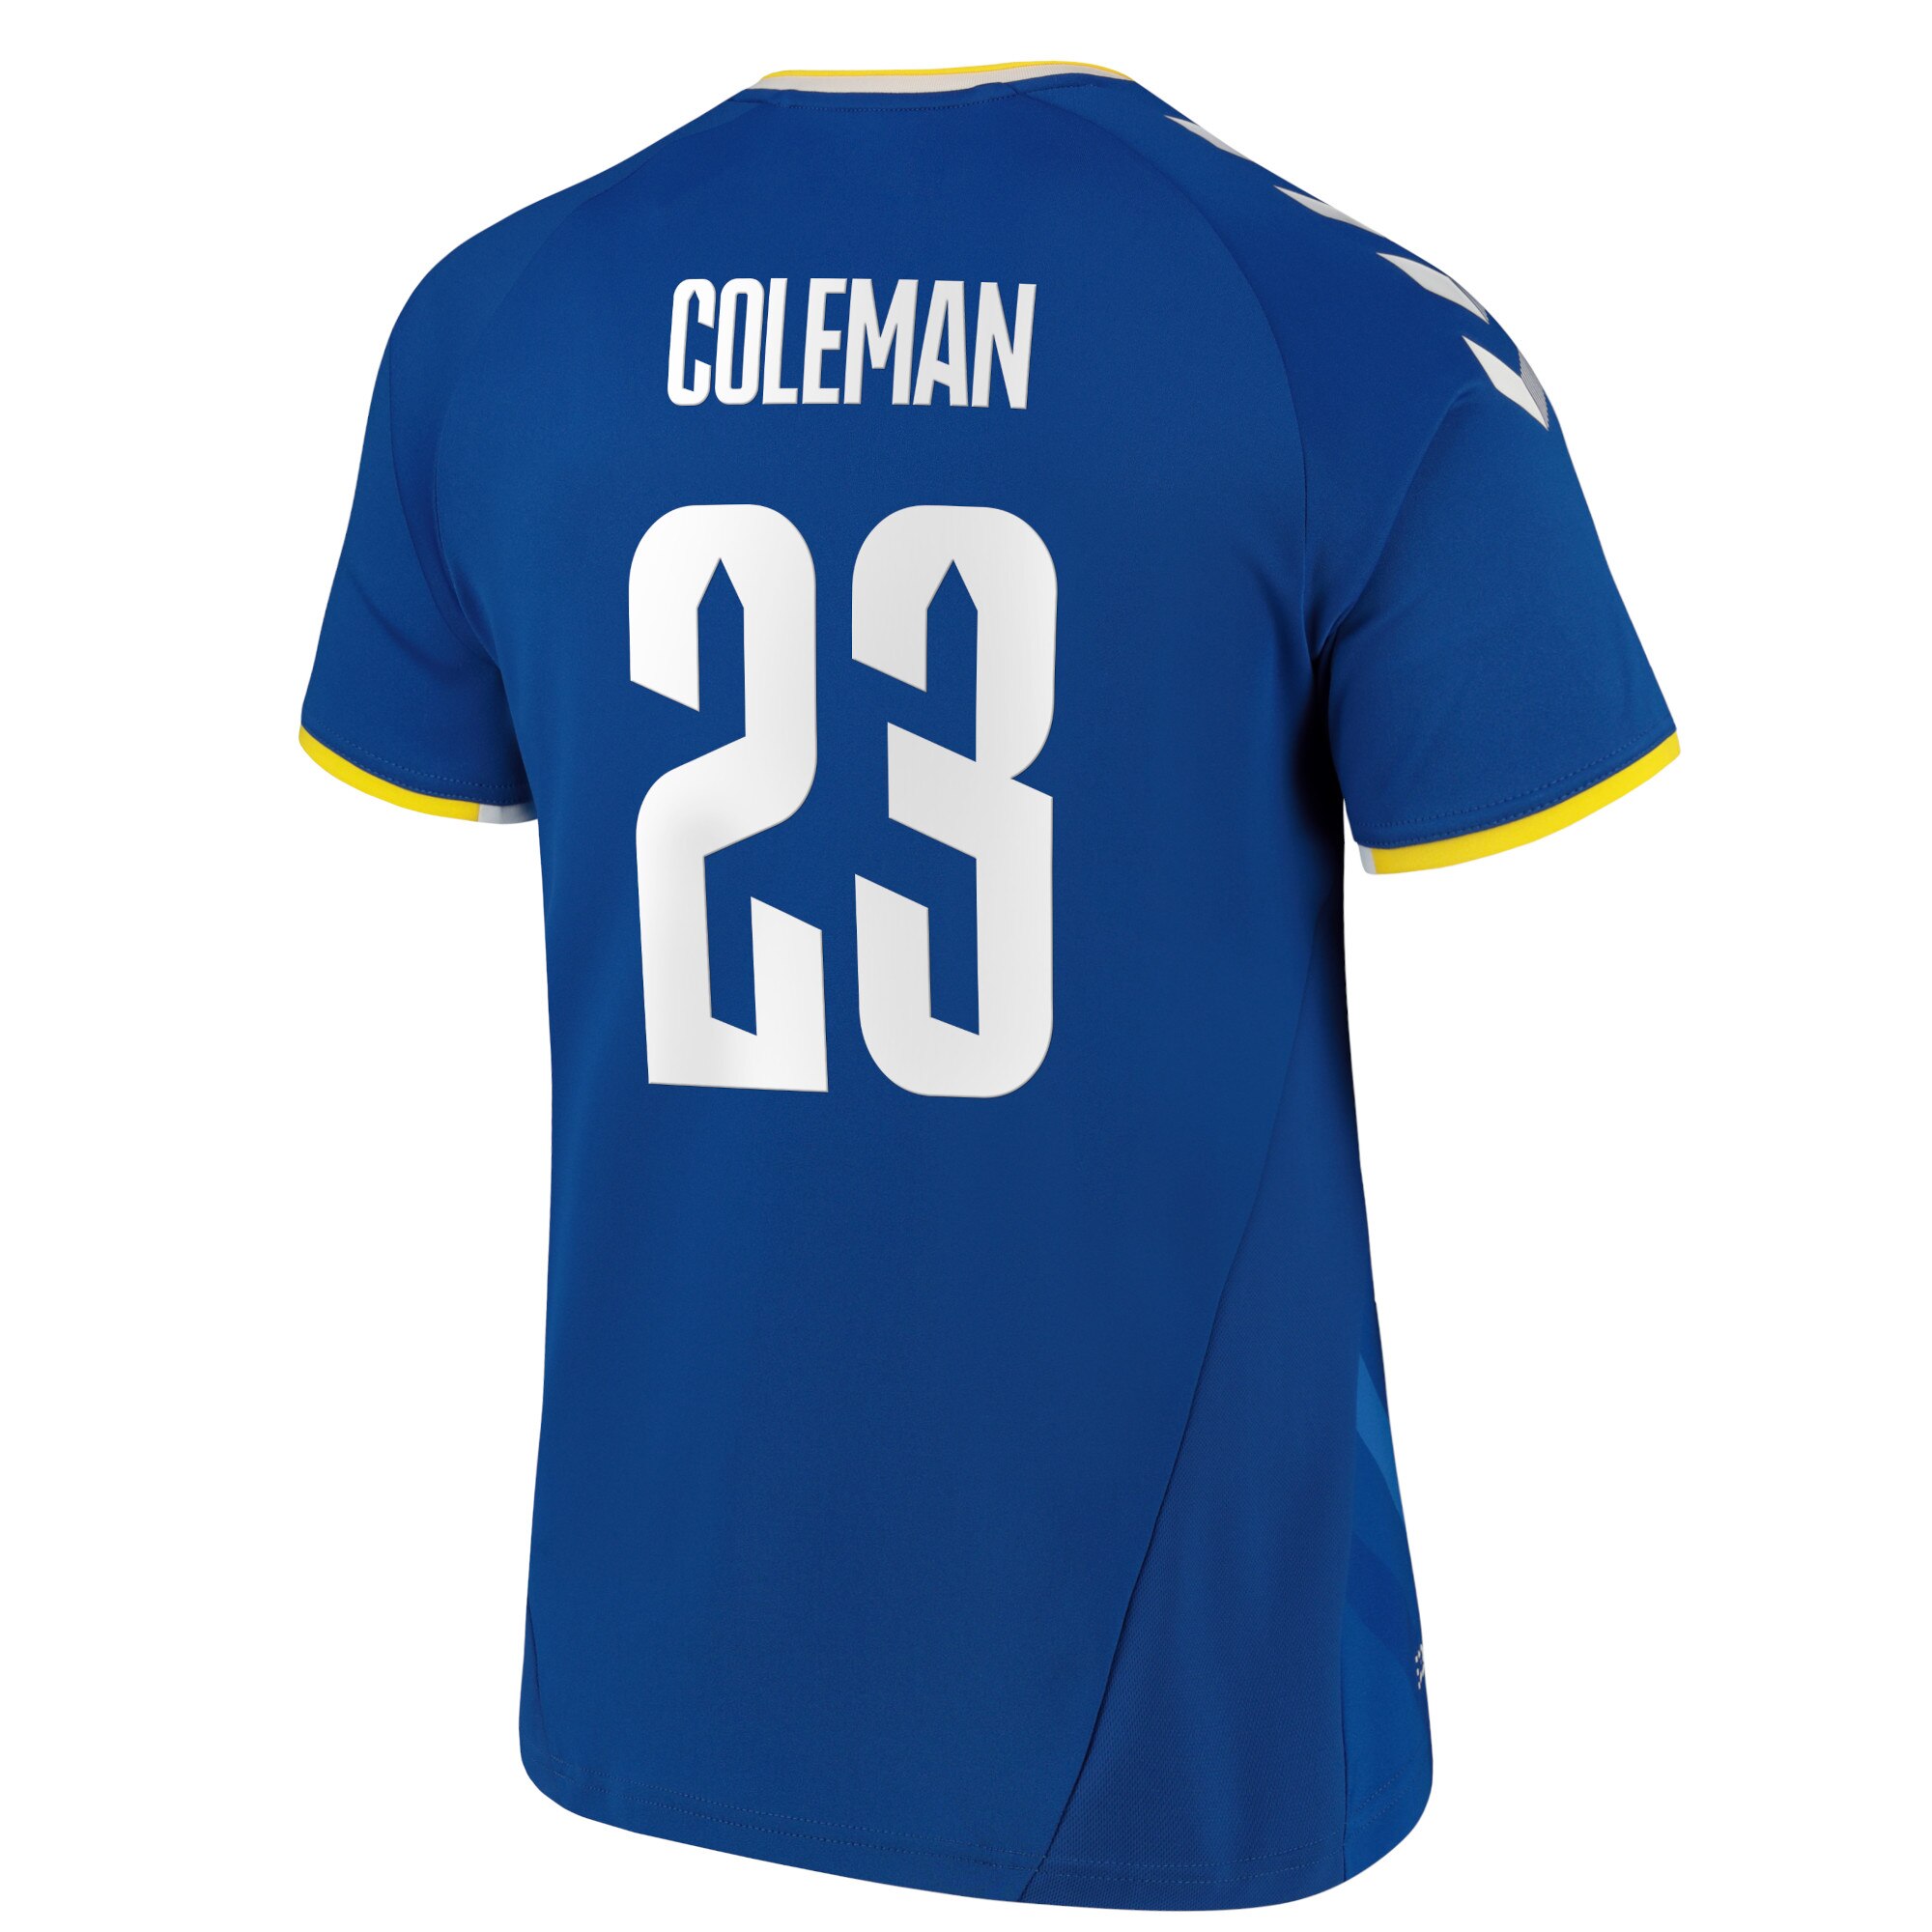 Everton Cup Home Shirt - 2021-22 with Coleman 23 printing